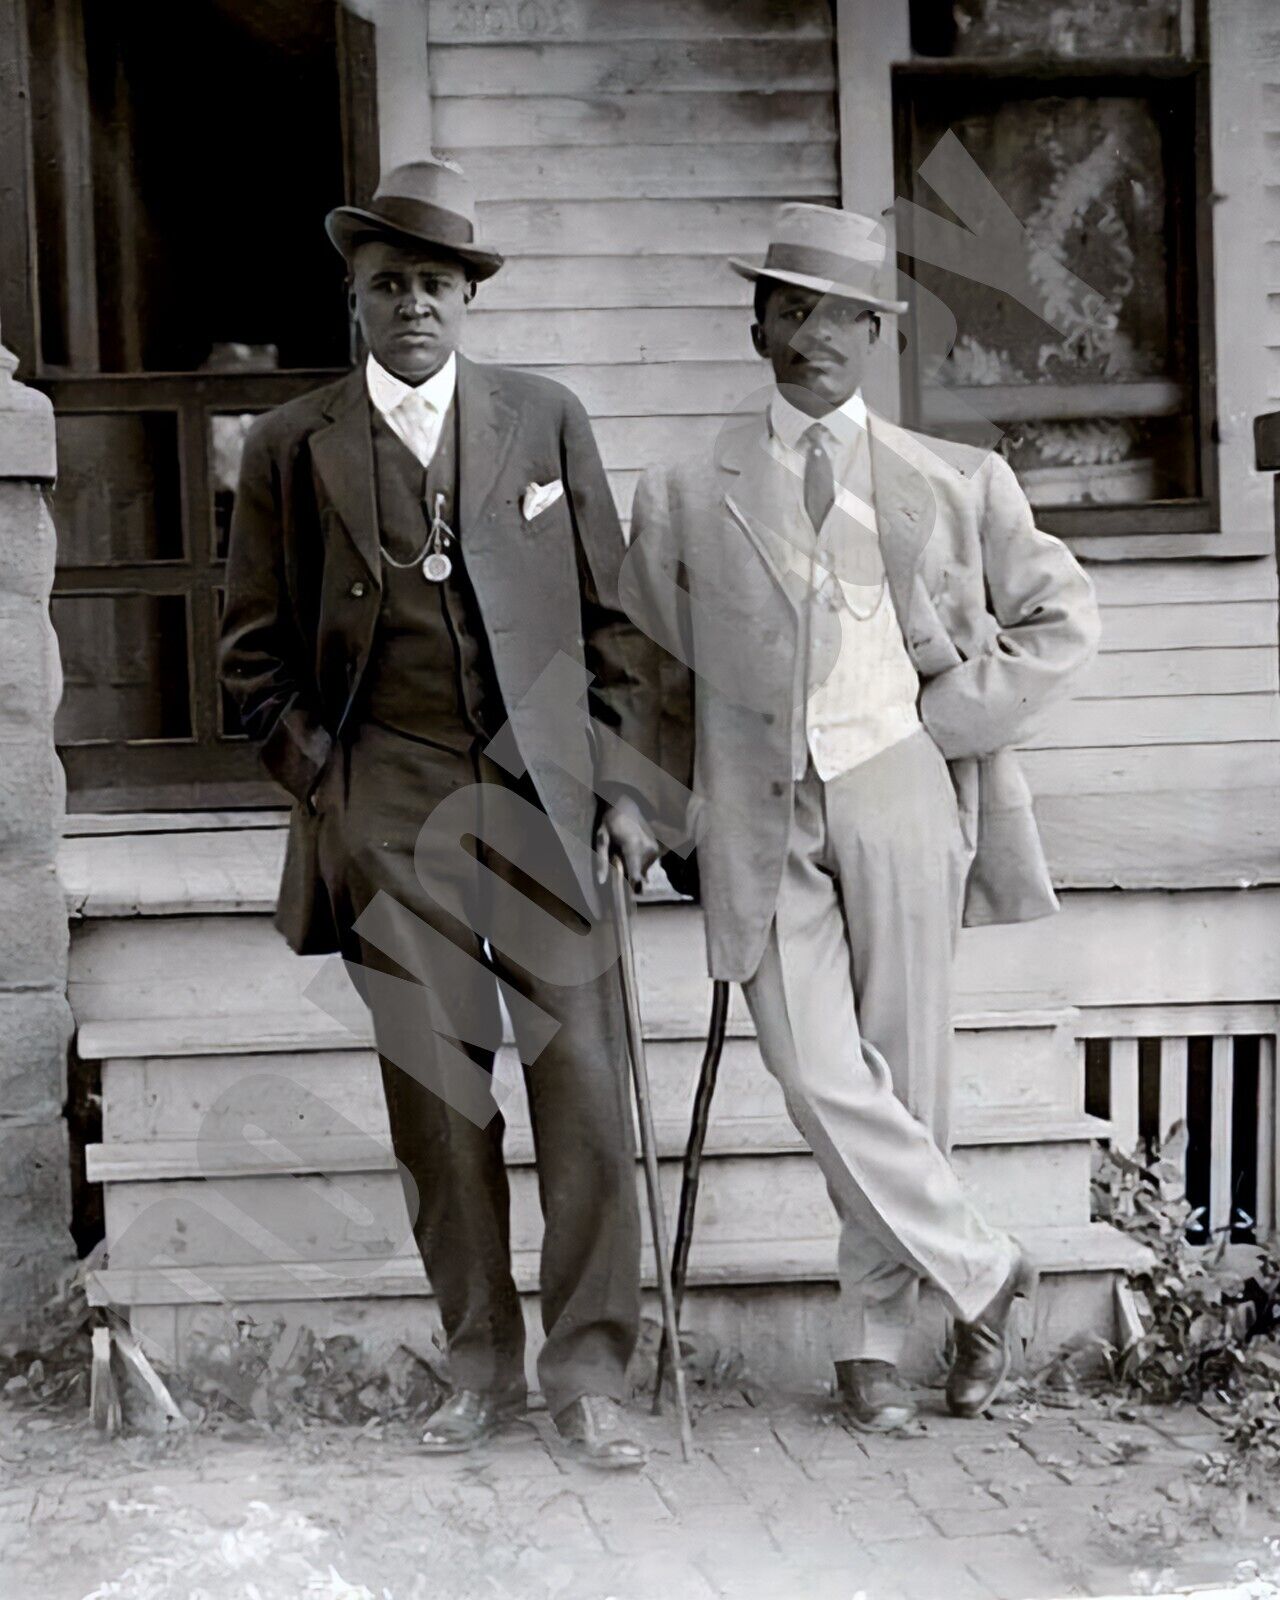 Two African-American Gentlemen From the Early 1900s All Dressed Up 8x10 Photo